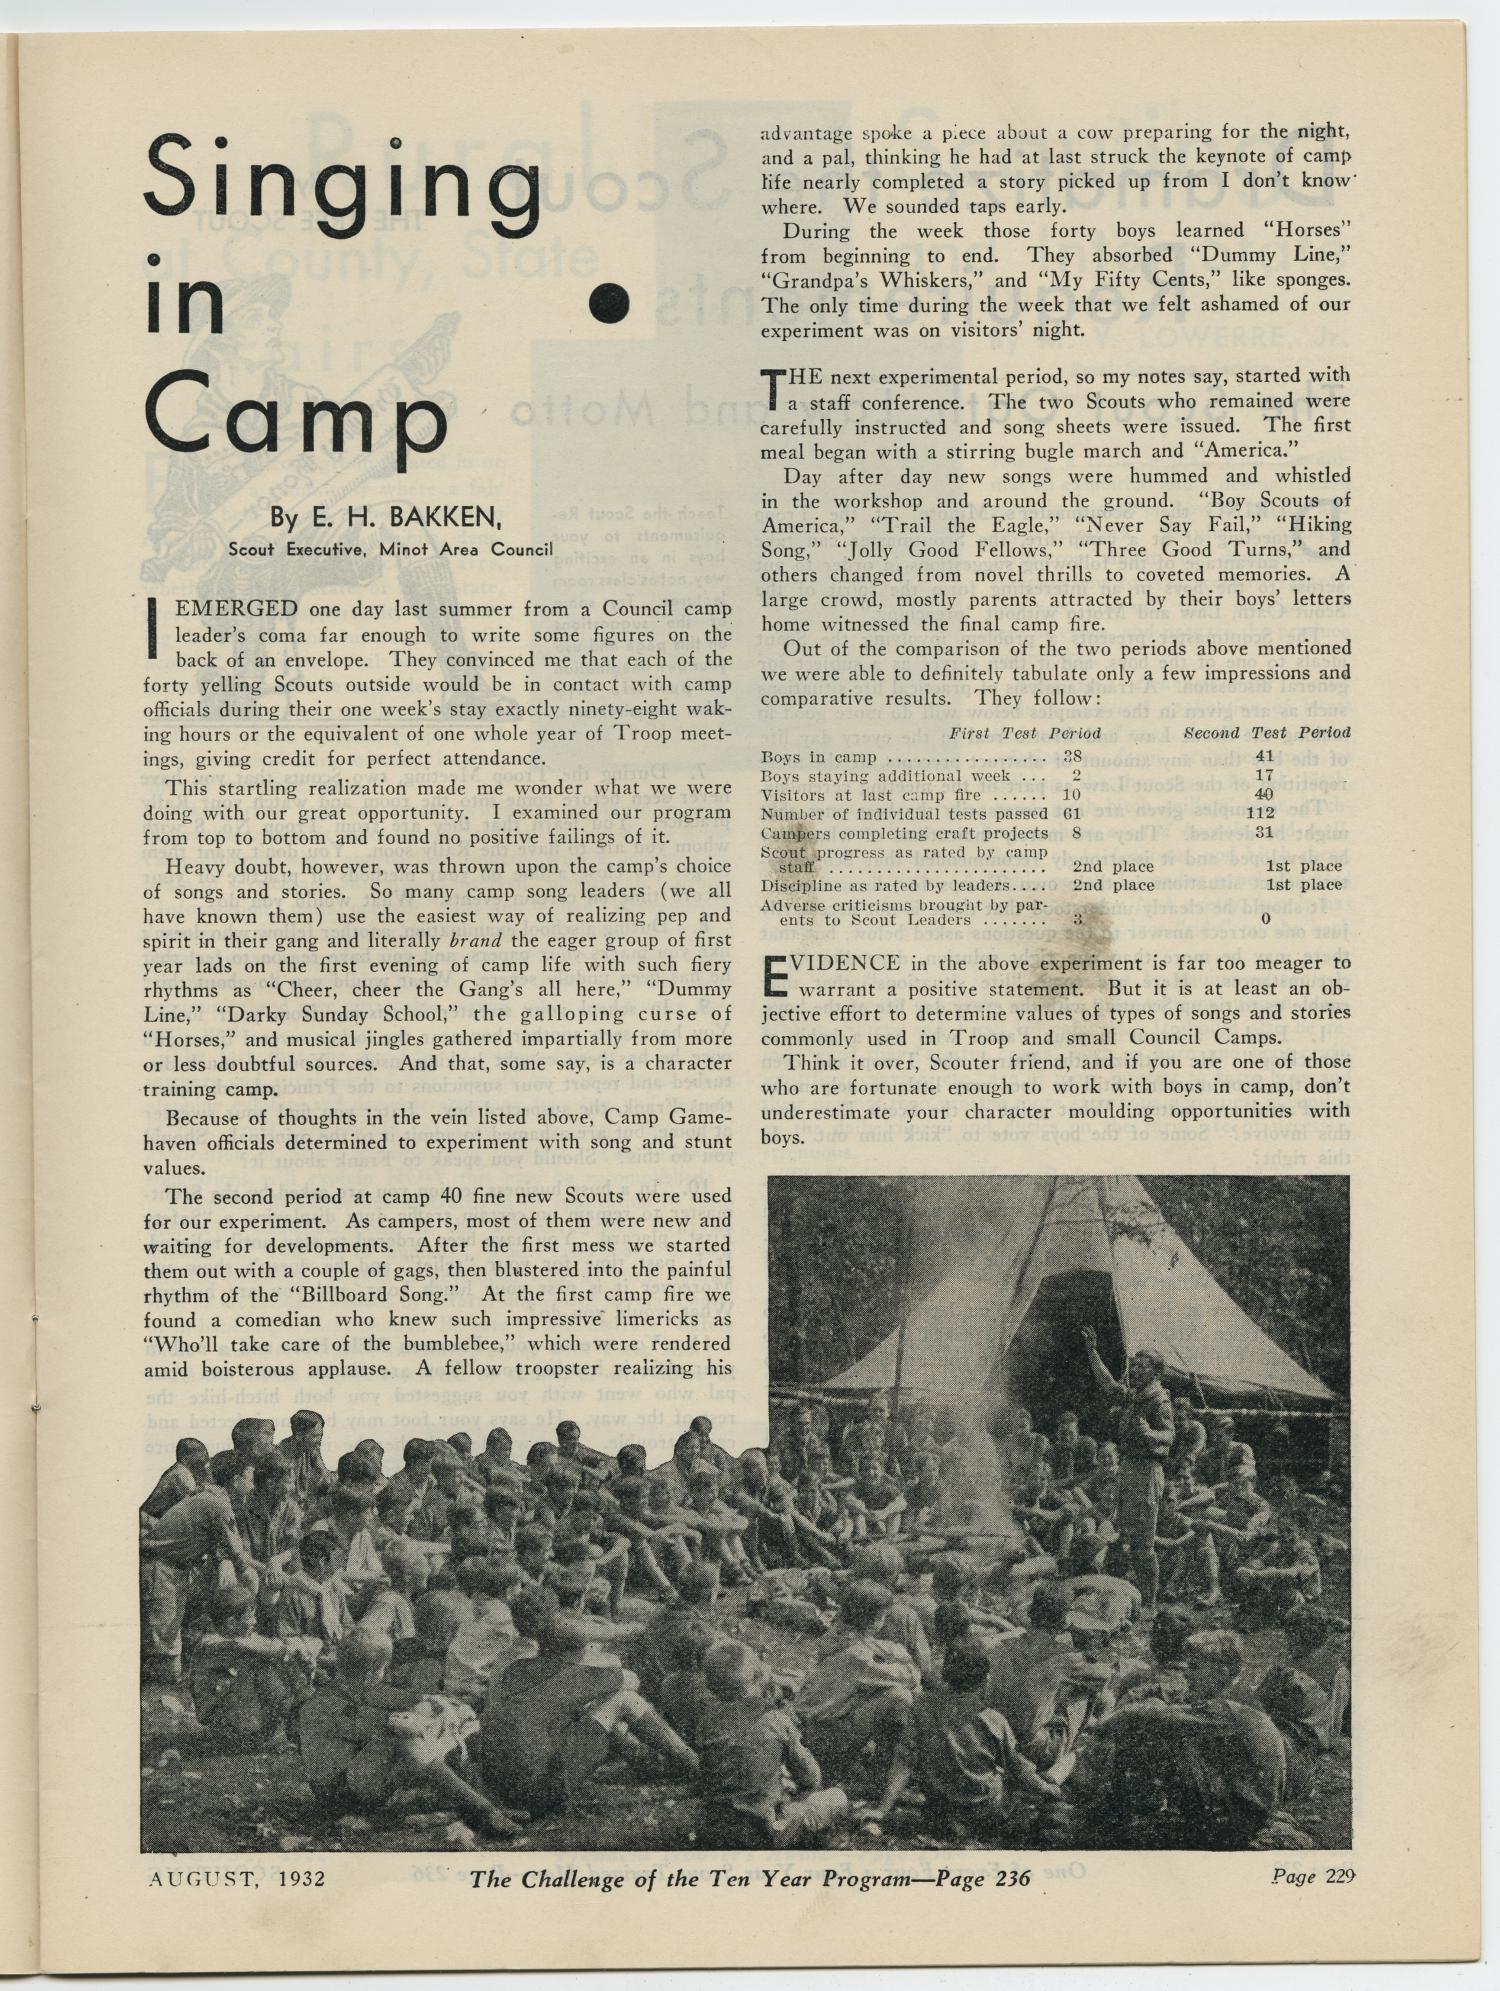 Scouting, Volume 20, Number 8, August 1932
                                                
                                                    229
                                                